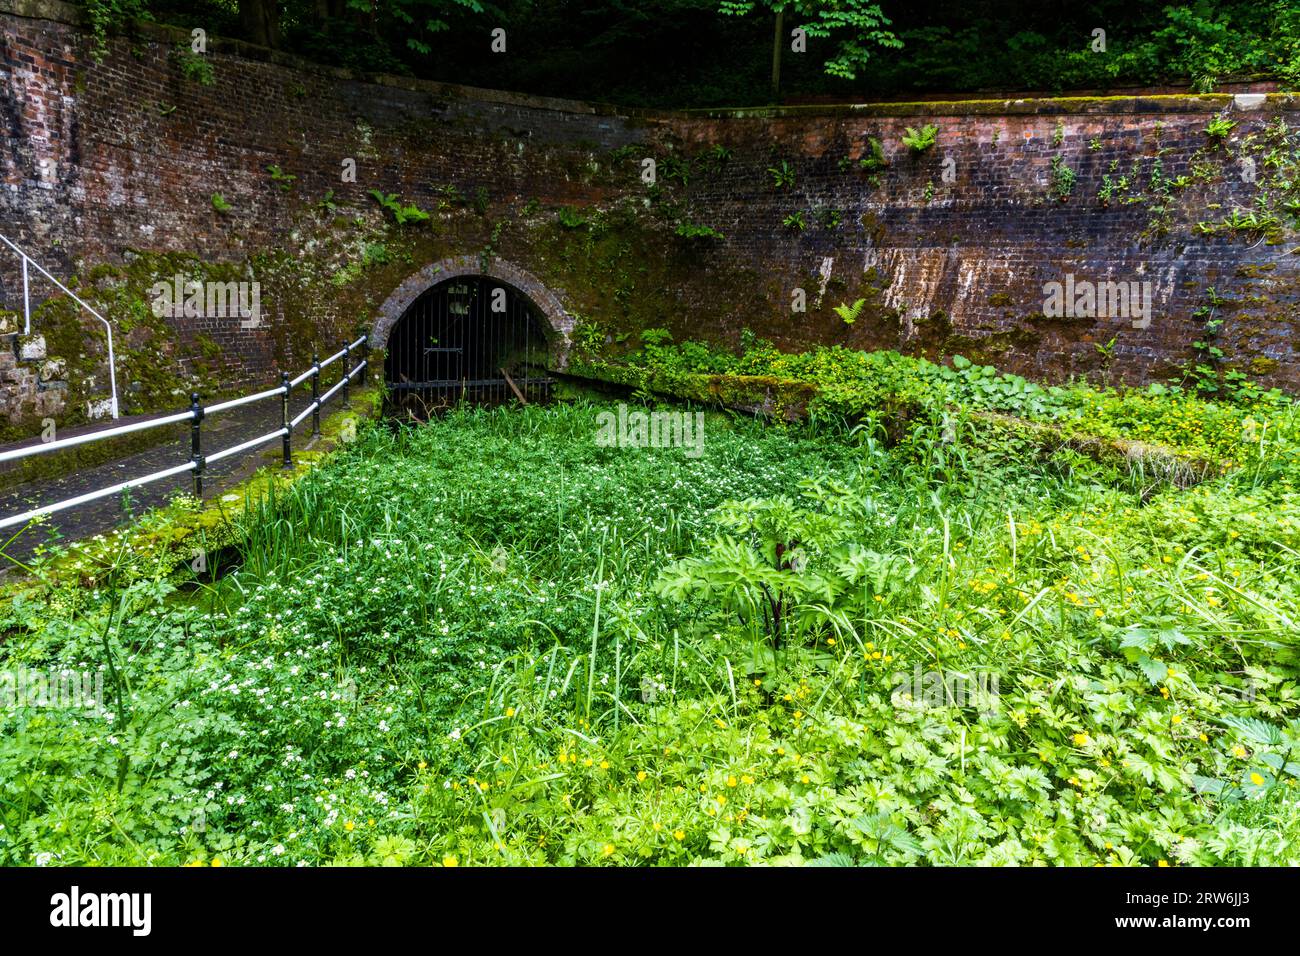 James Brindley original Harecastle Tunnel entrance. The Trent and Mersey Canal Kidsgrove, Newcastle-under-Lyme. Stock Photo